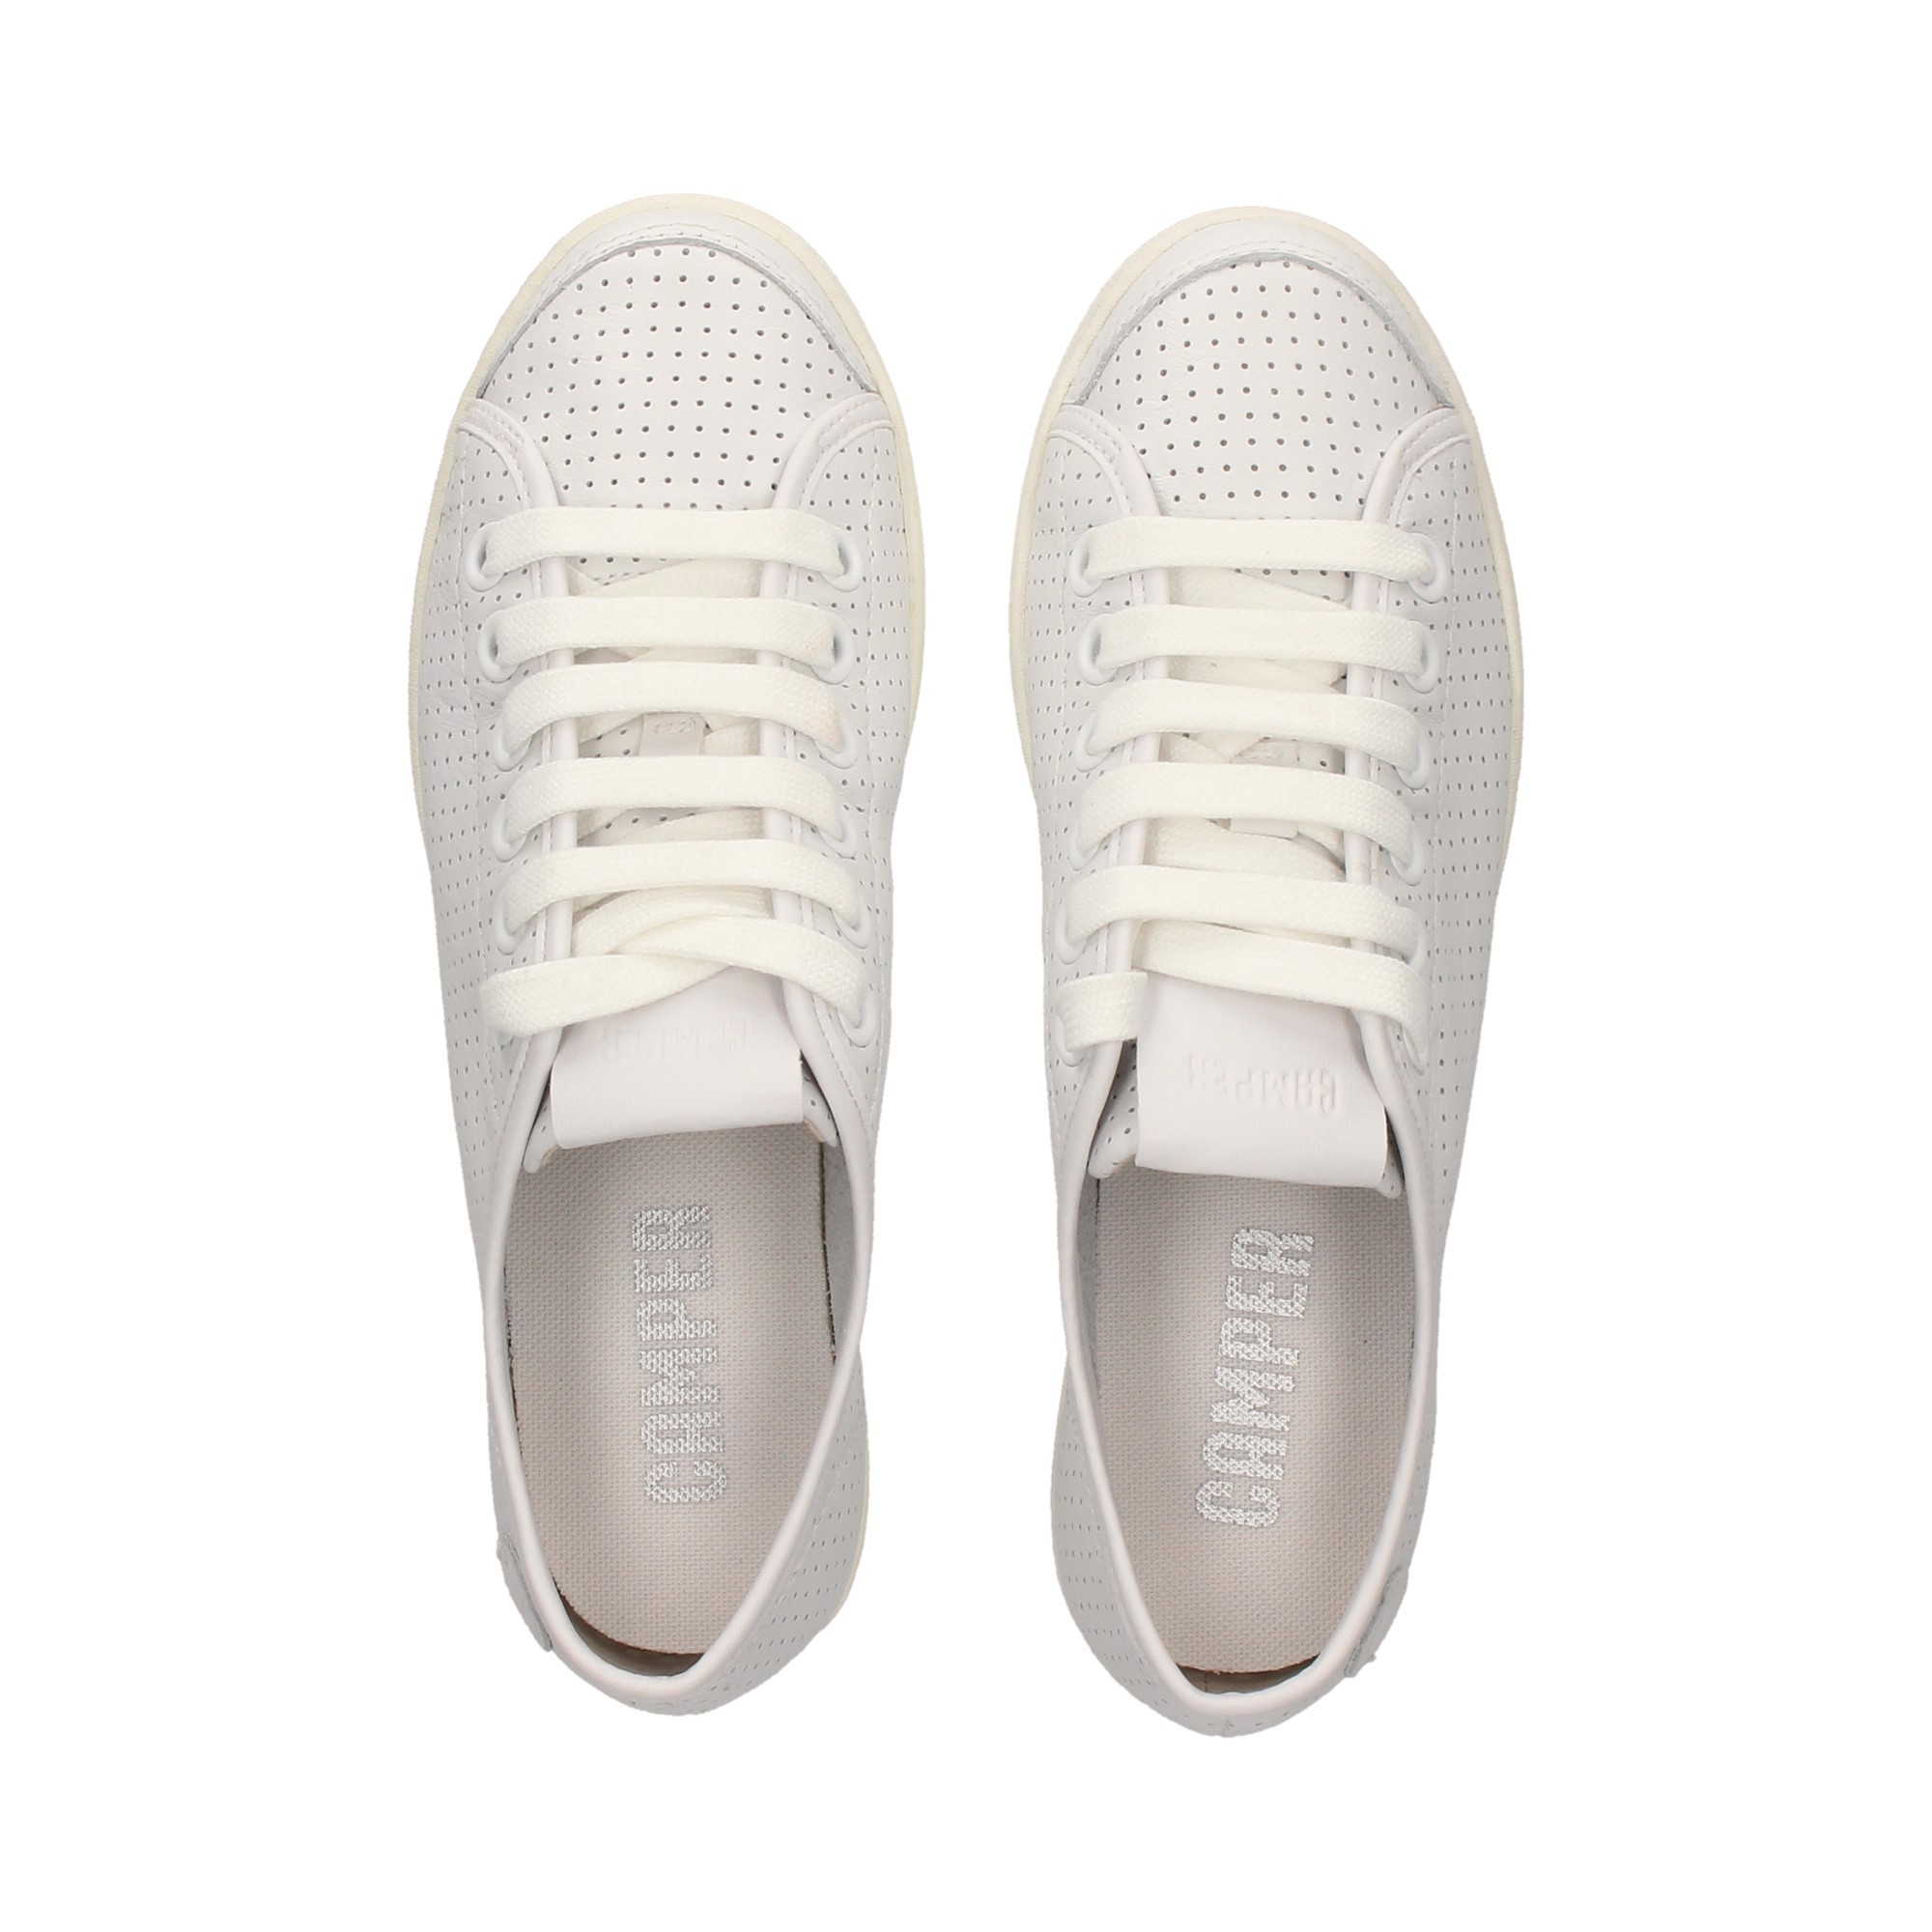 sporty-perforated-white-skin